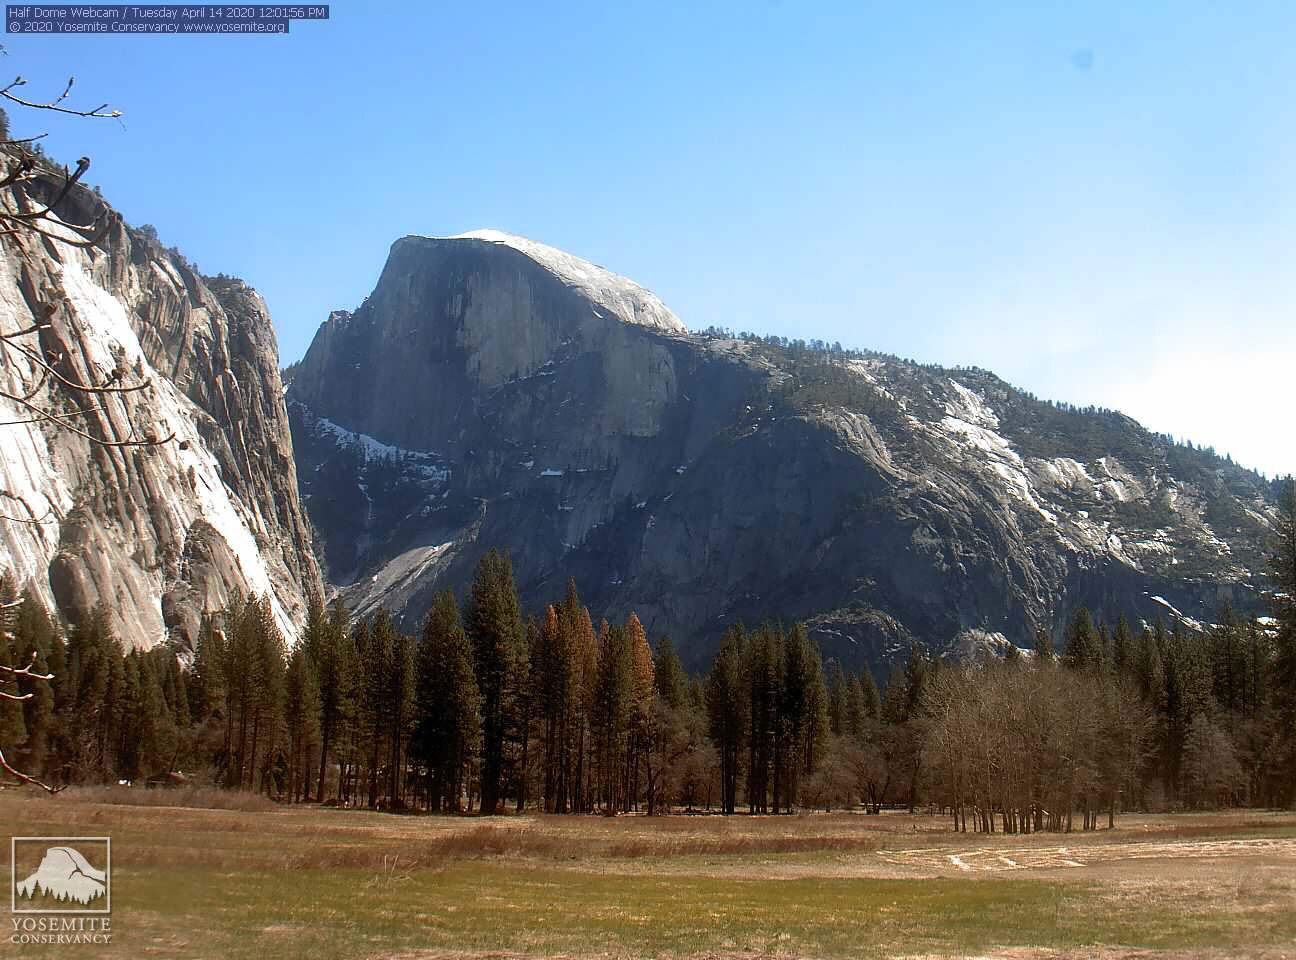 A screenshot of the Half Dome webcam in Yosemite National Park, from April 14, 2020. Webcam courtesy of Yosemite Conservancy.